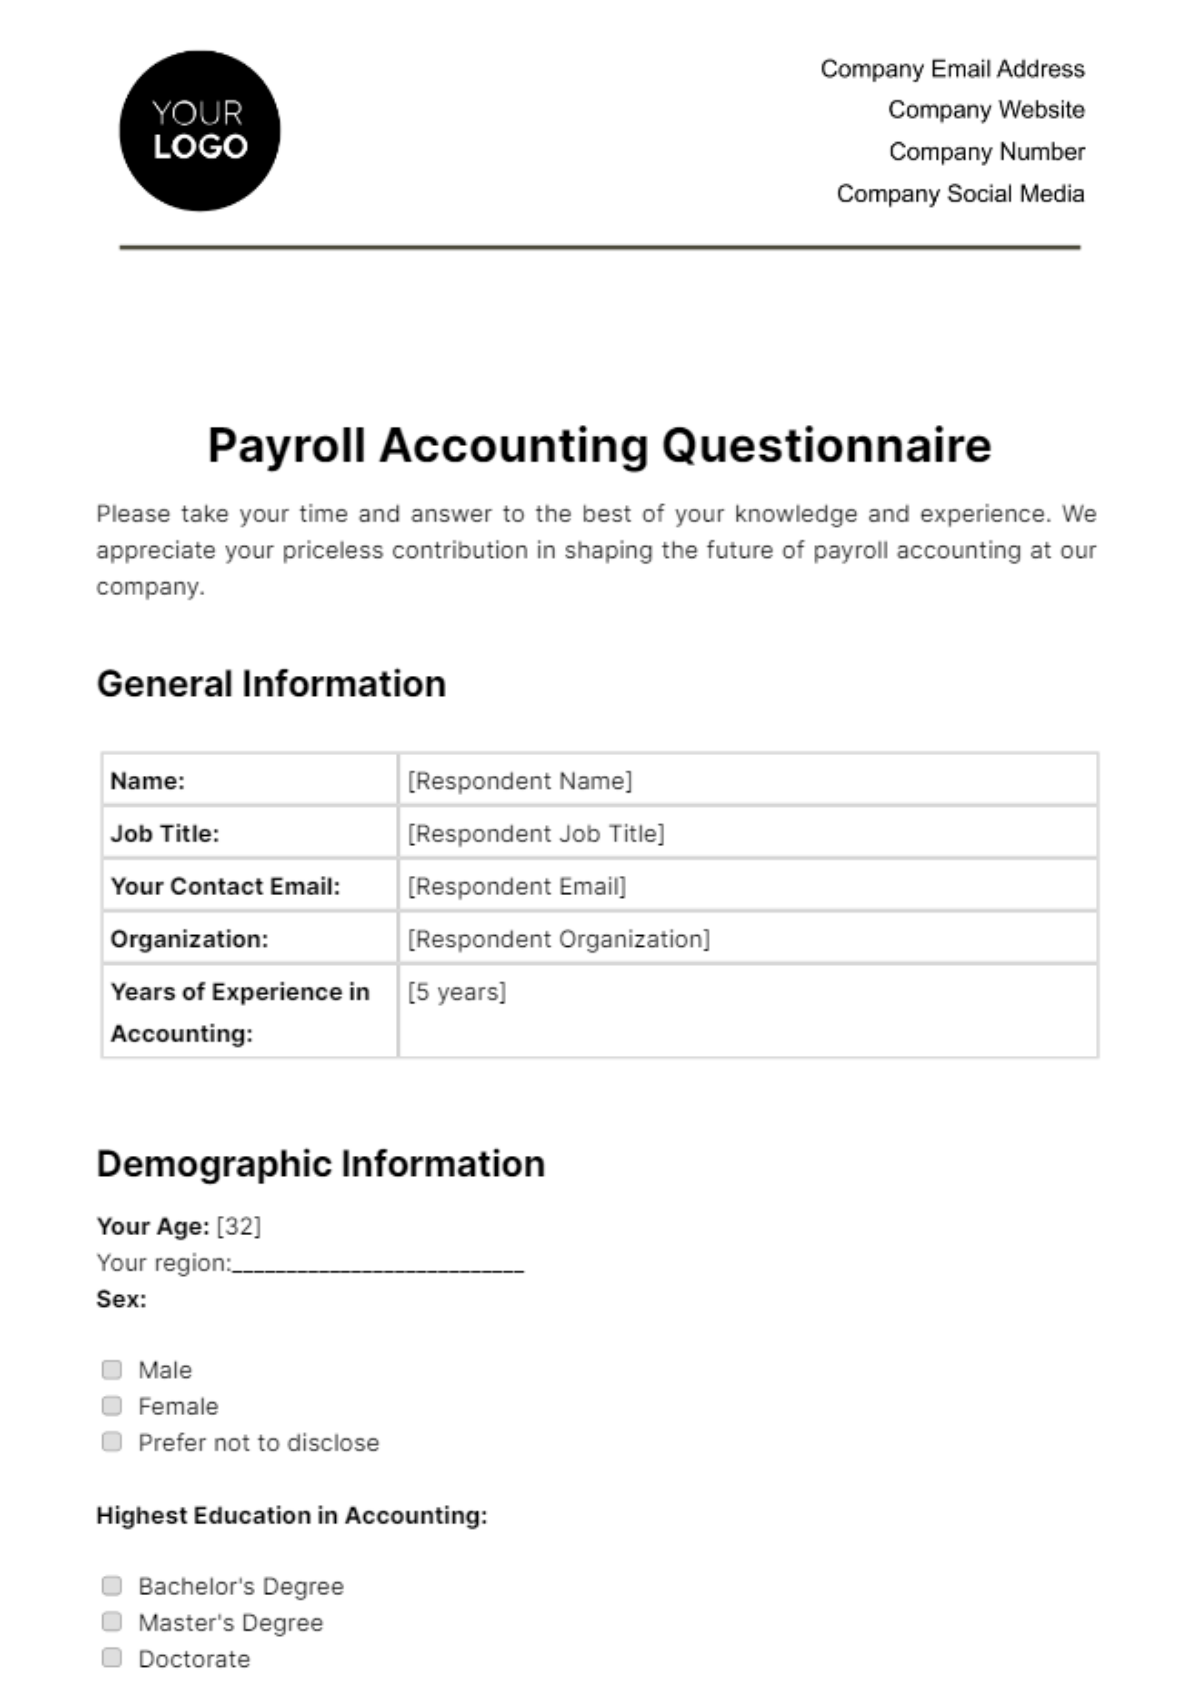 Free Payroll Accounting Questionnaire Template